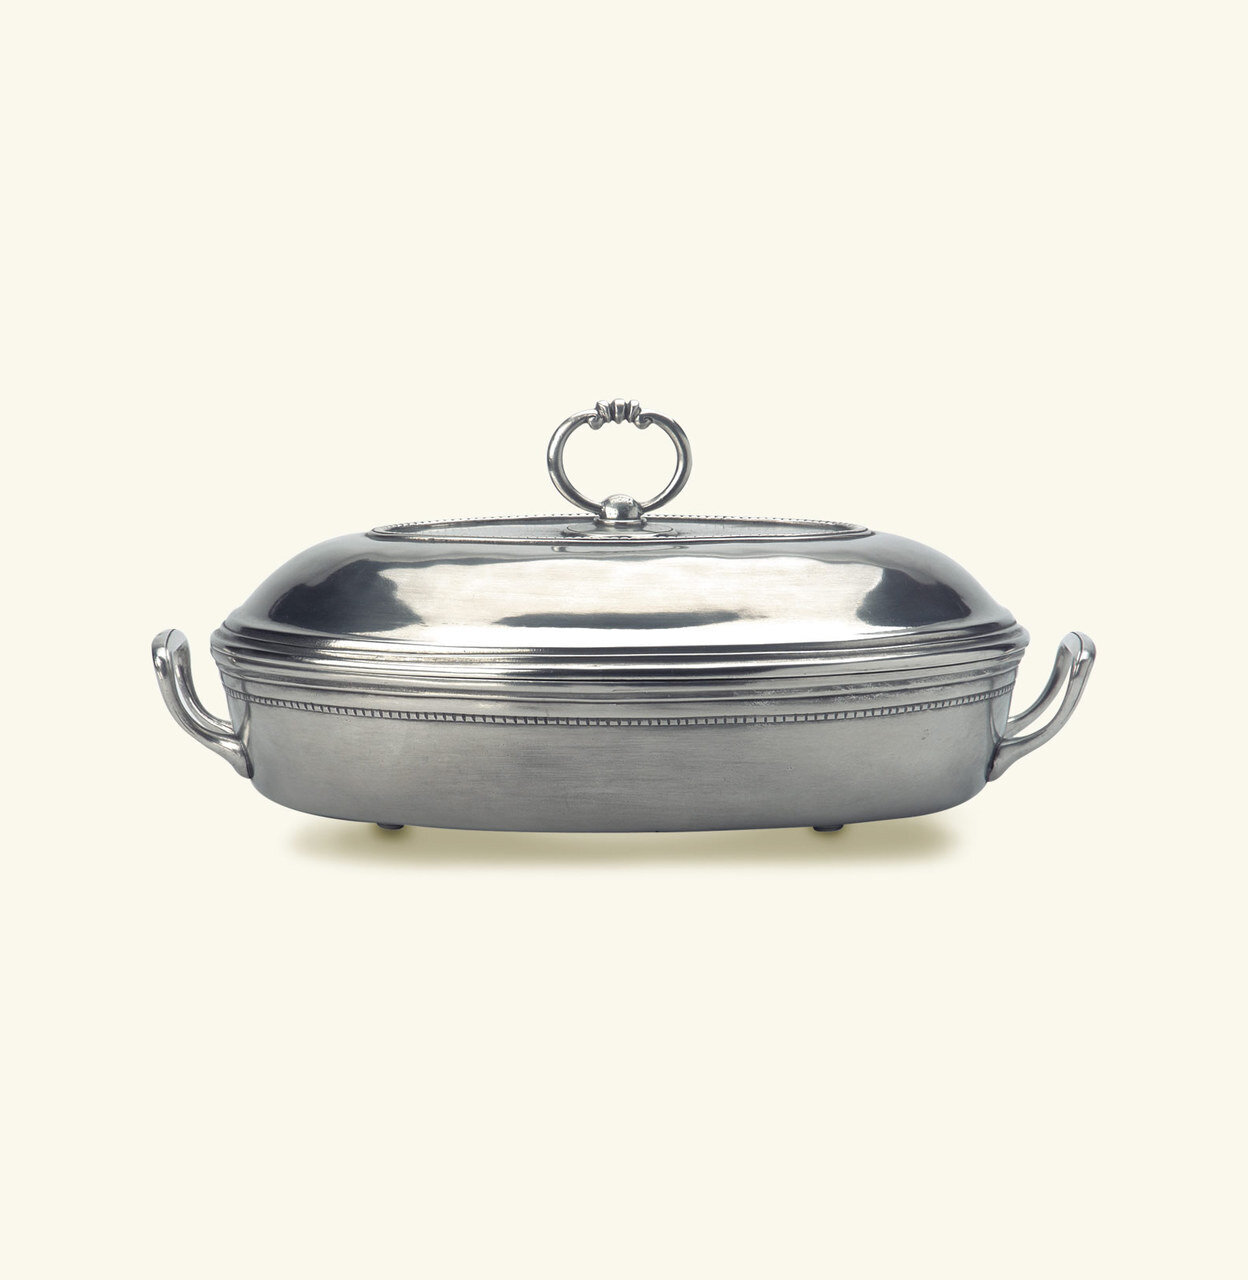 Match Pewter Toscana Pyrex Casserole Dish With Lid